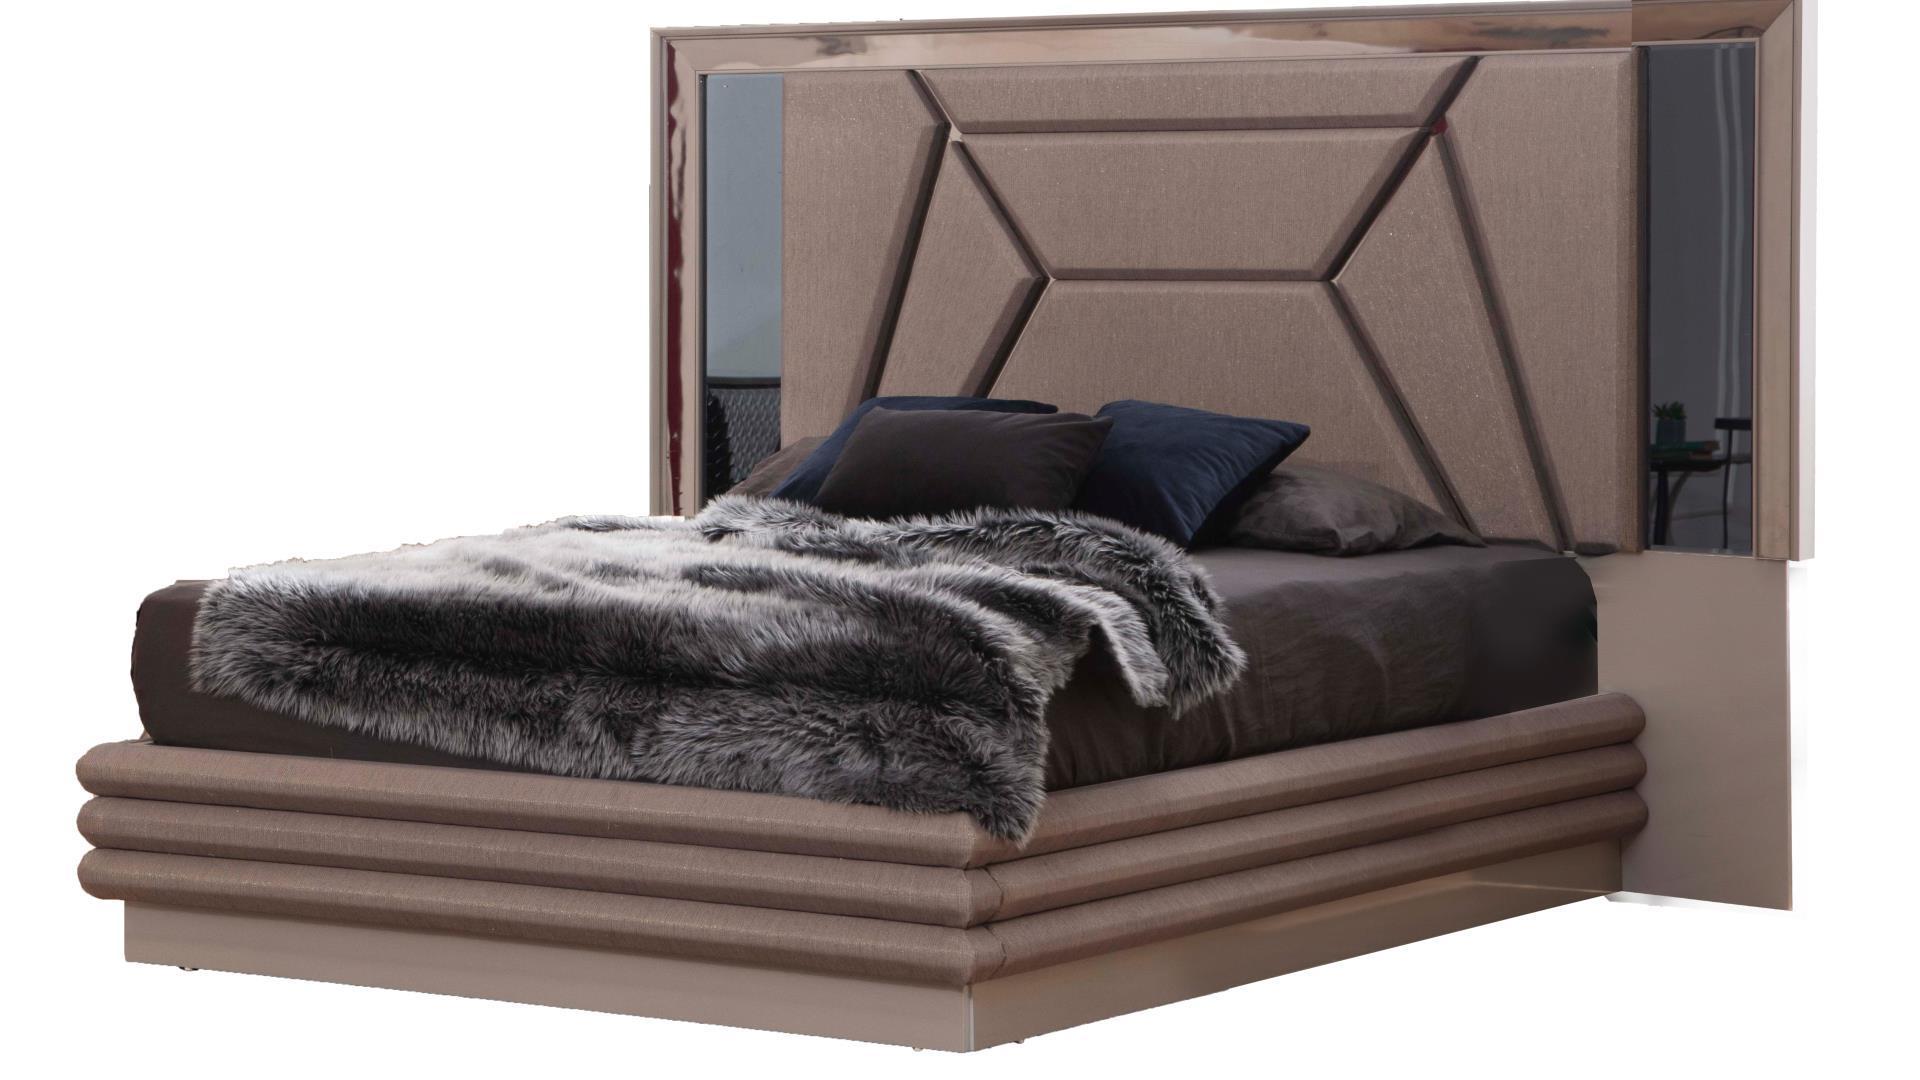 

    
Taupe Fabric & Mirror King Bed WENDY Galaxy Home Modern Contemporary
